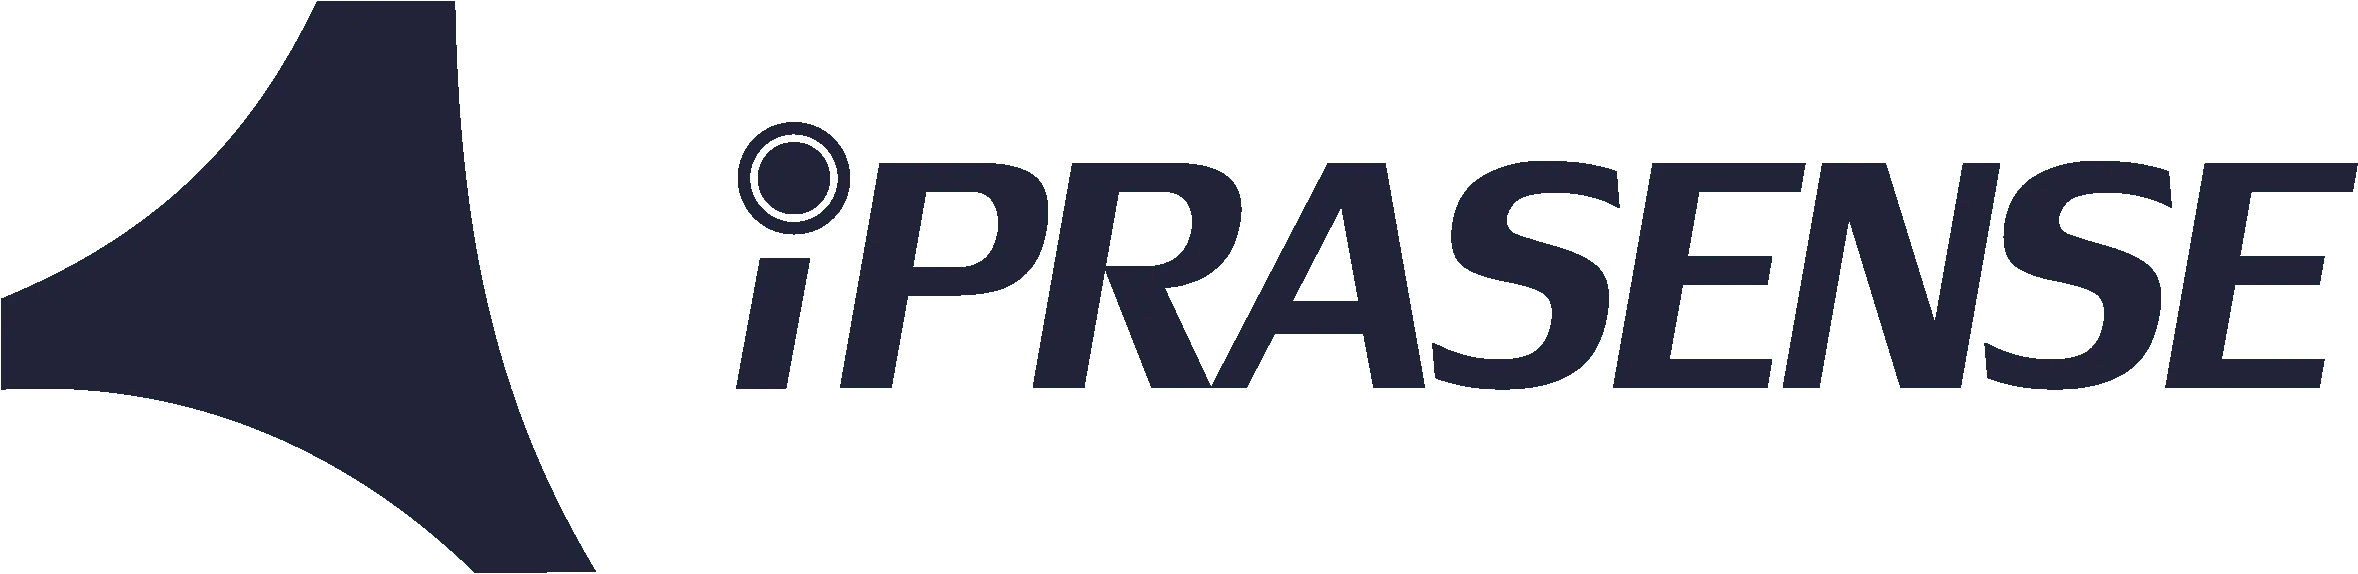 LOGO IPRASENSE CELL CULTURE MONITORING